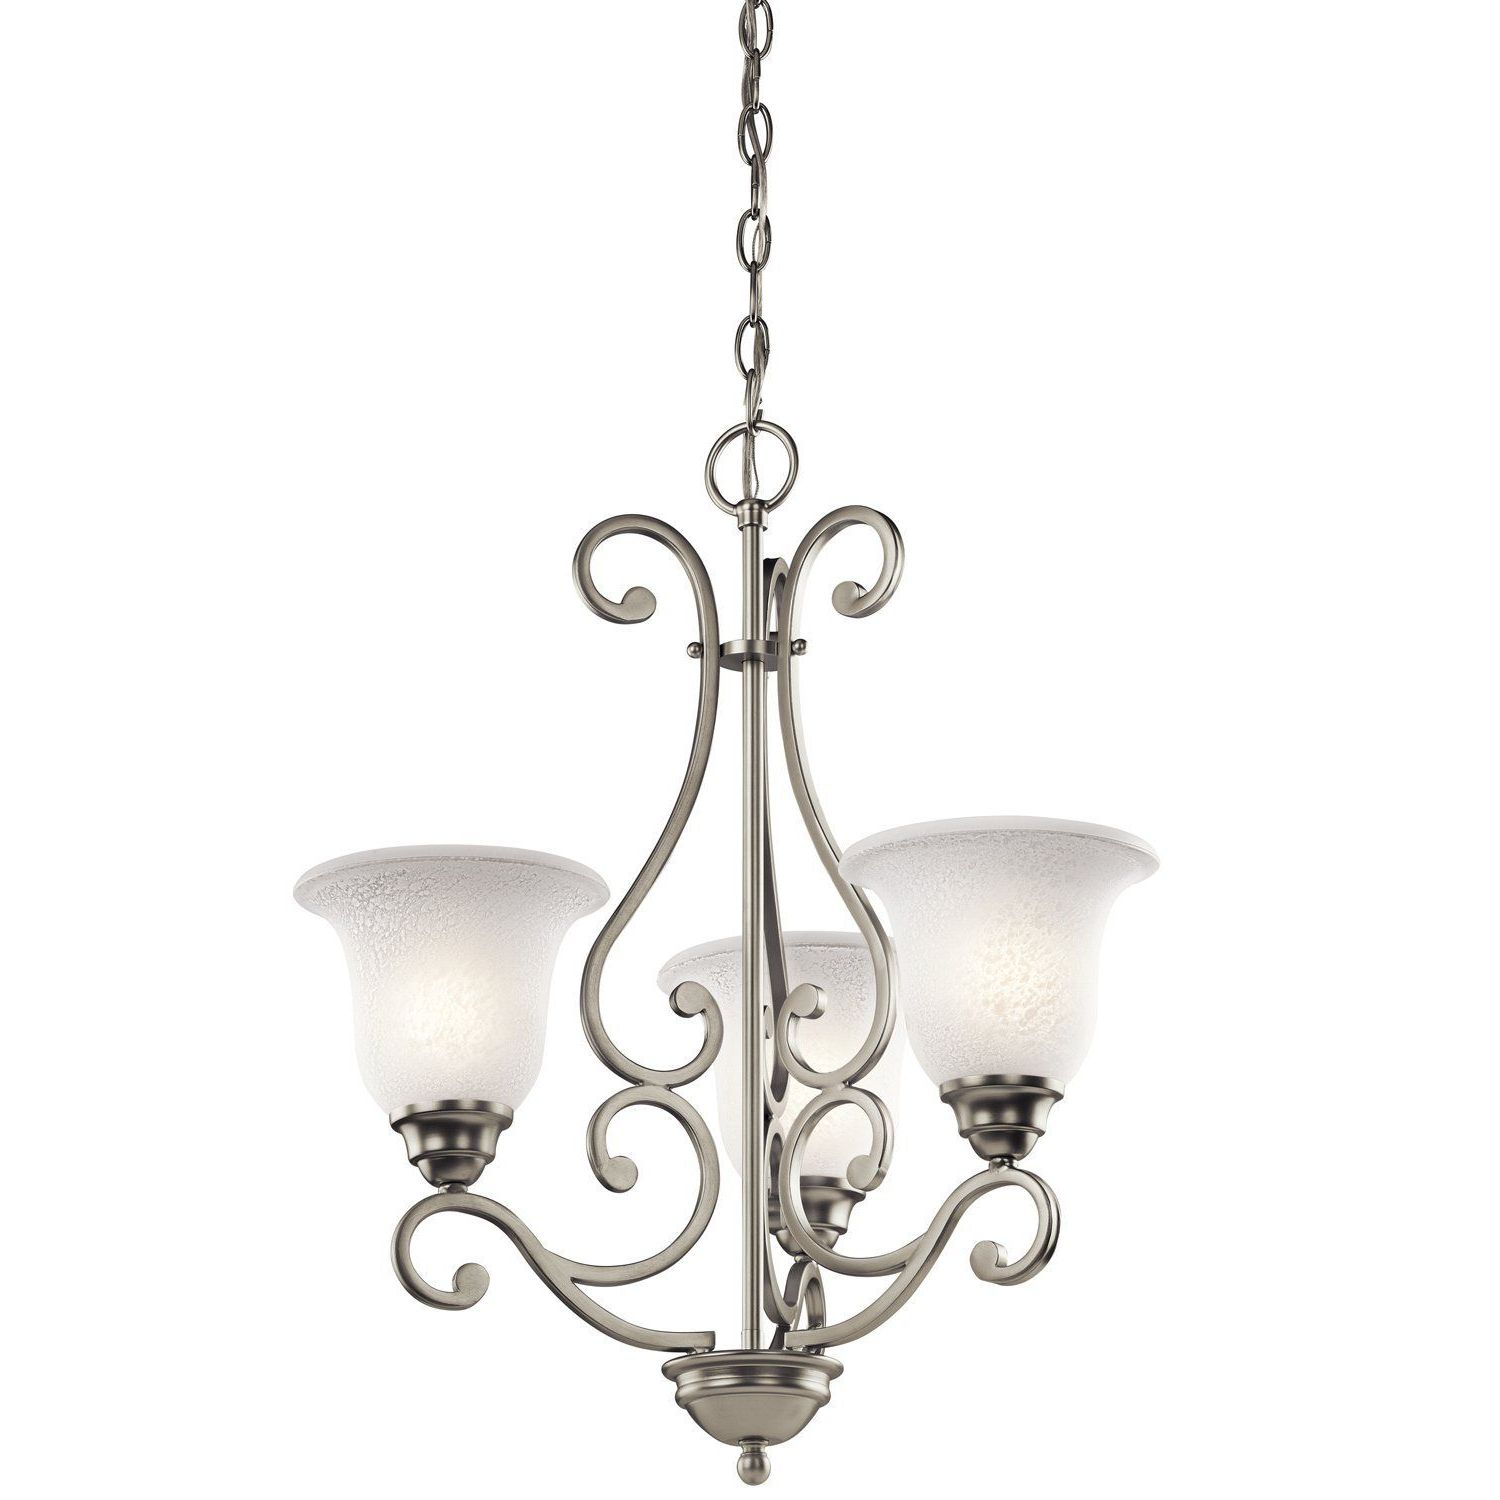 Brushed Nickel Modern Chandeliers With Current Kichler Lighting 43223ni Camerena 3 Light Chandelier (View 3 of 20)